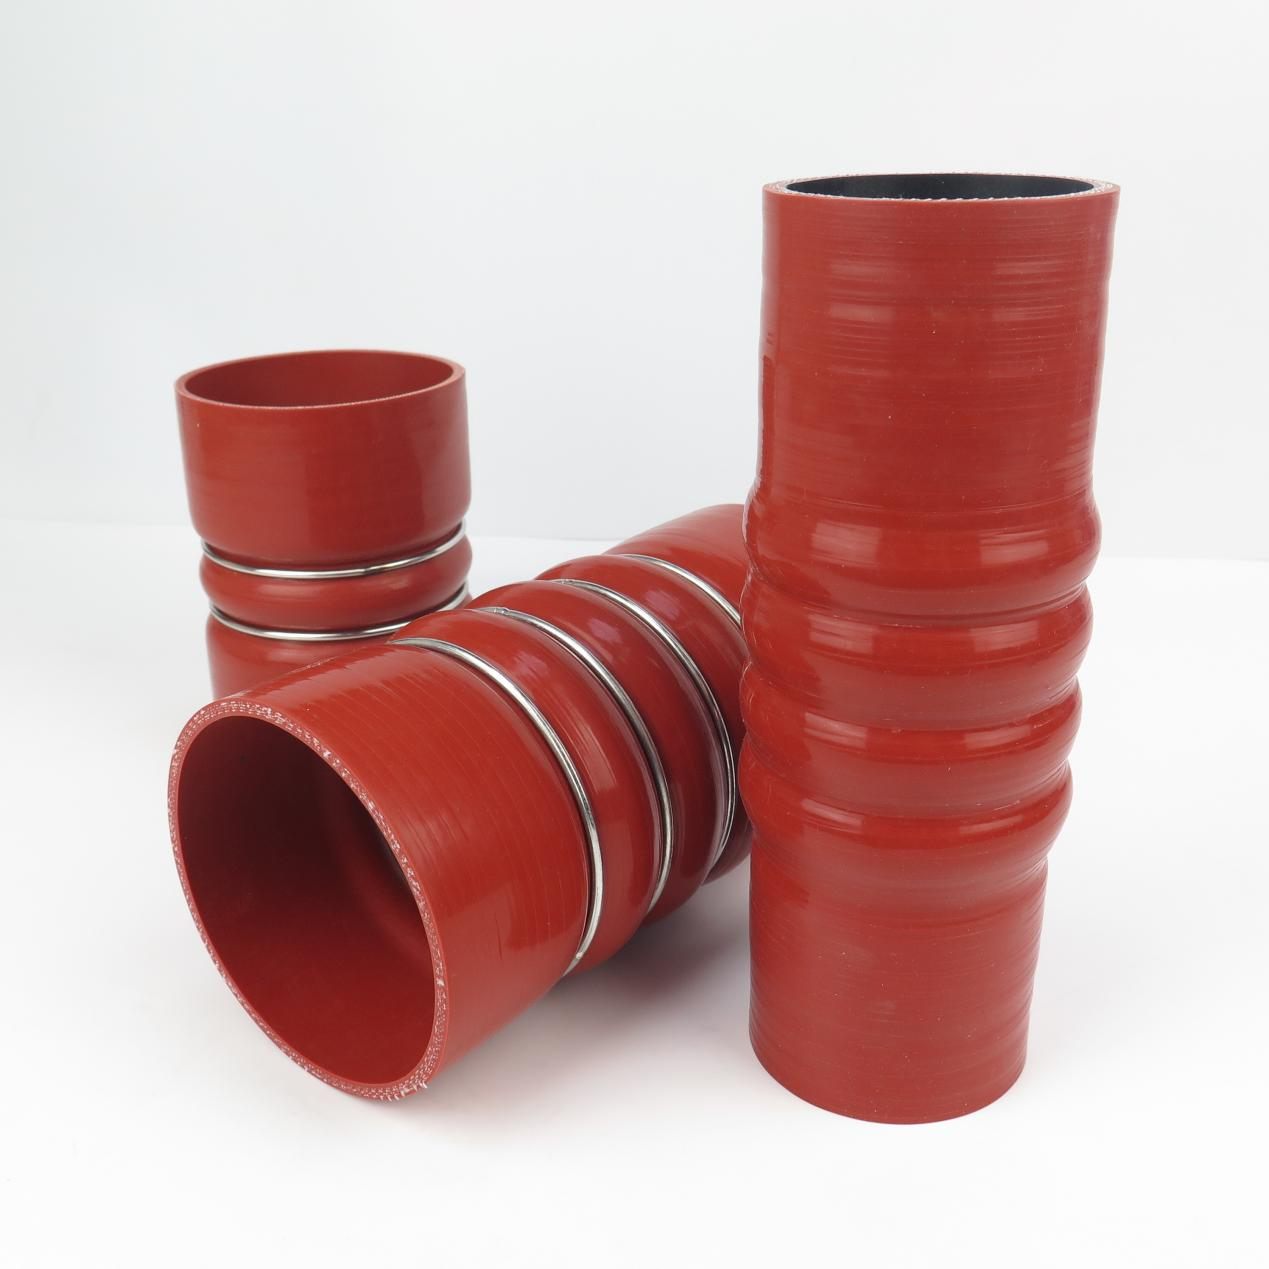 We have all the silicone hose that you want